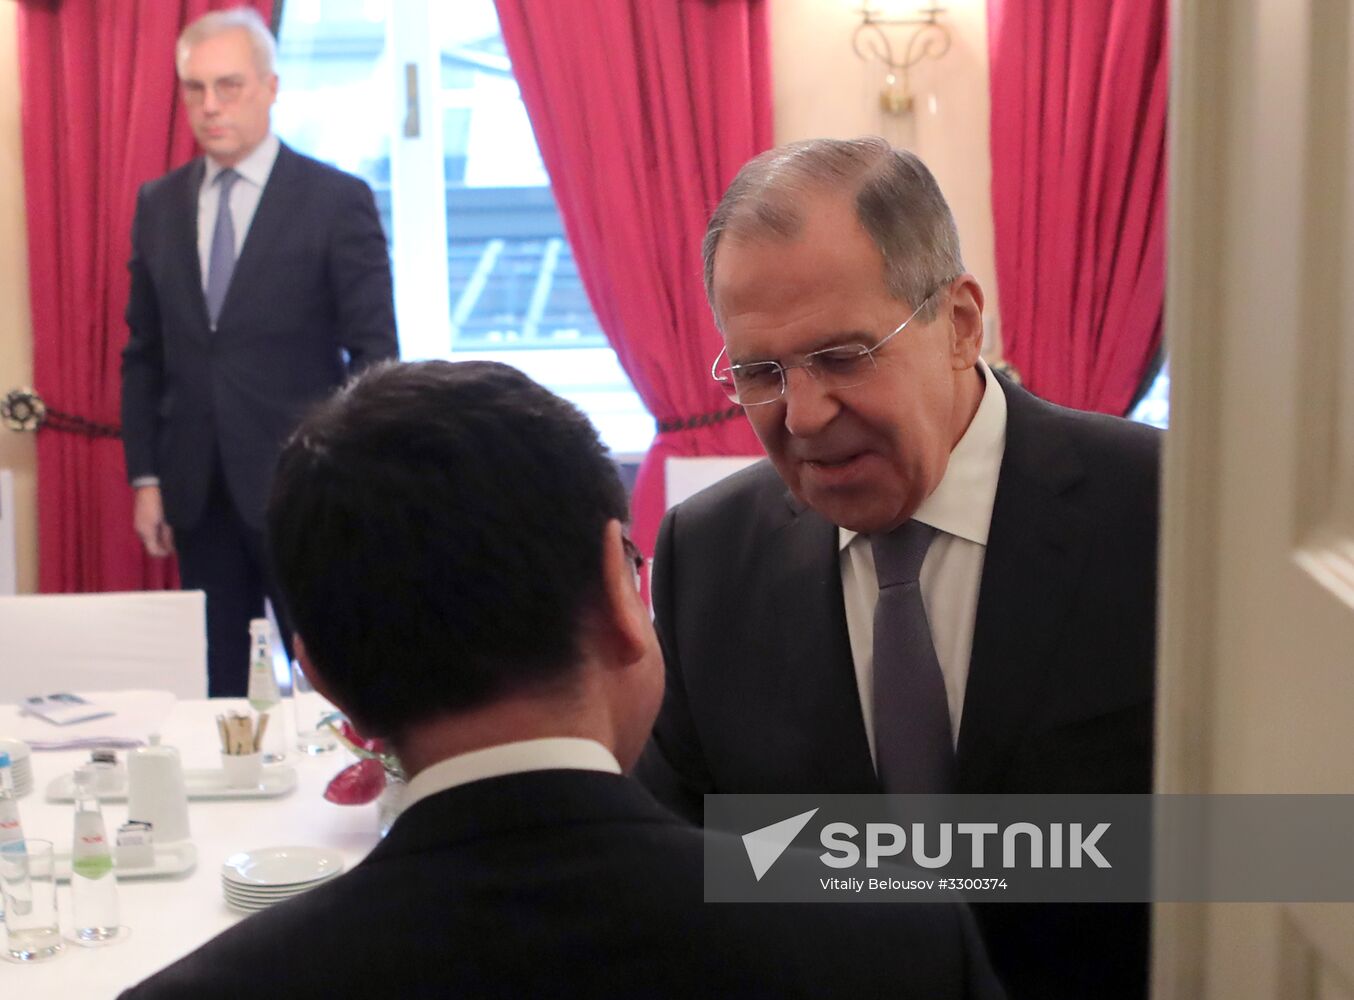 Foreign Minister Sergei Lavrov holds a number of meetings on sidelines of Munich Security Conference